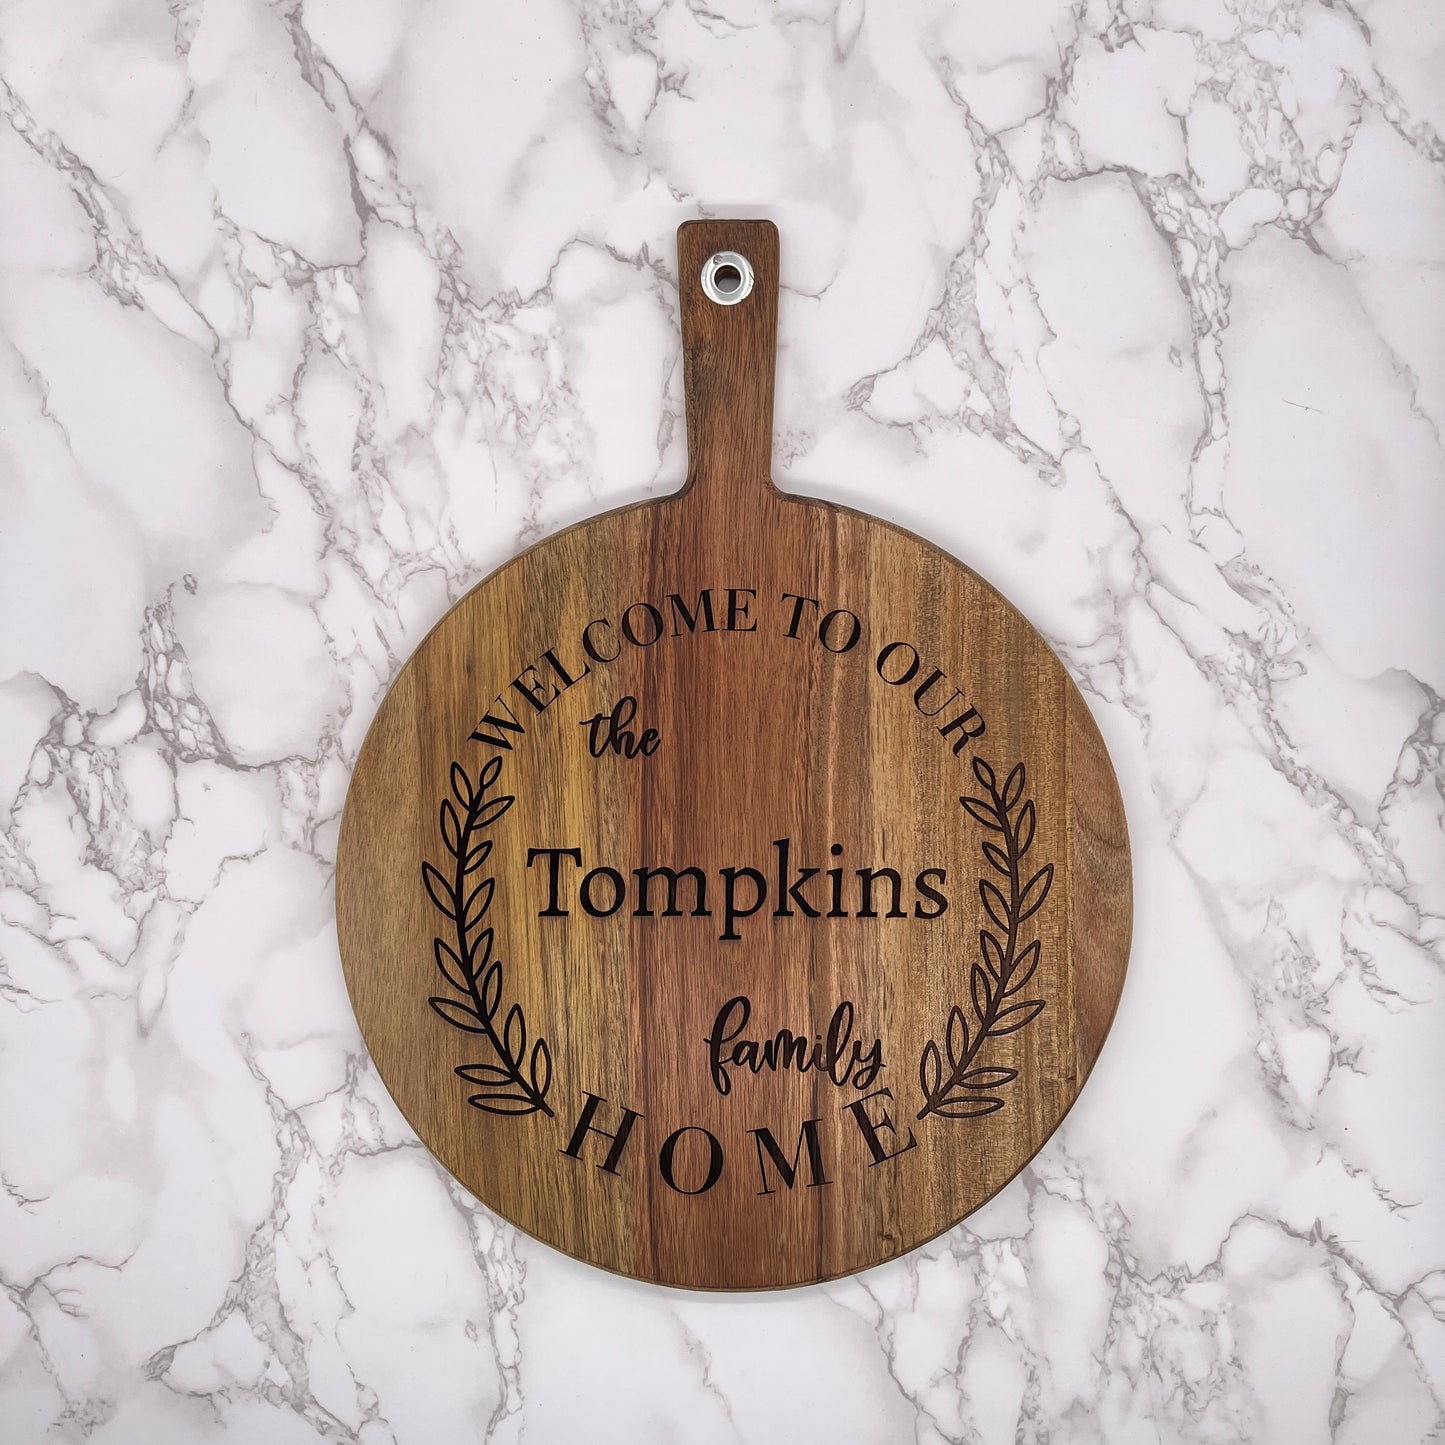 Personalized Cutting Boards and Charcuterie - B-3:  11.75" x 15.75" Acacia